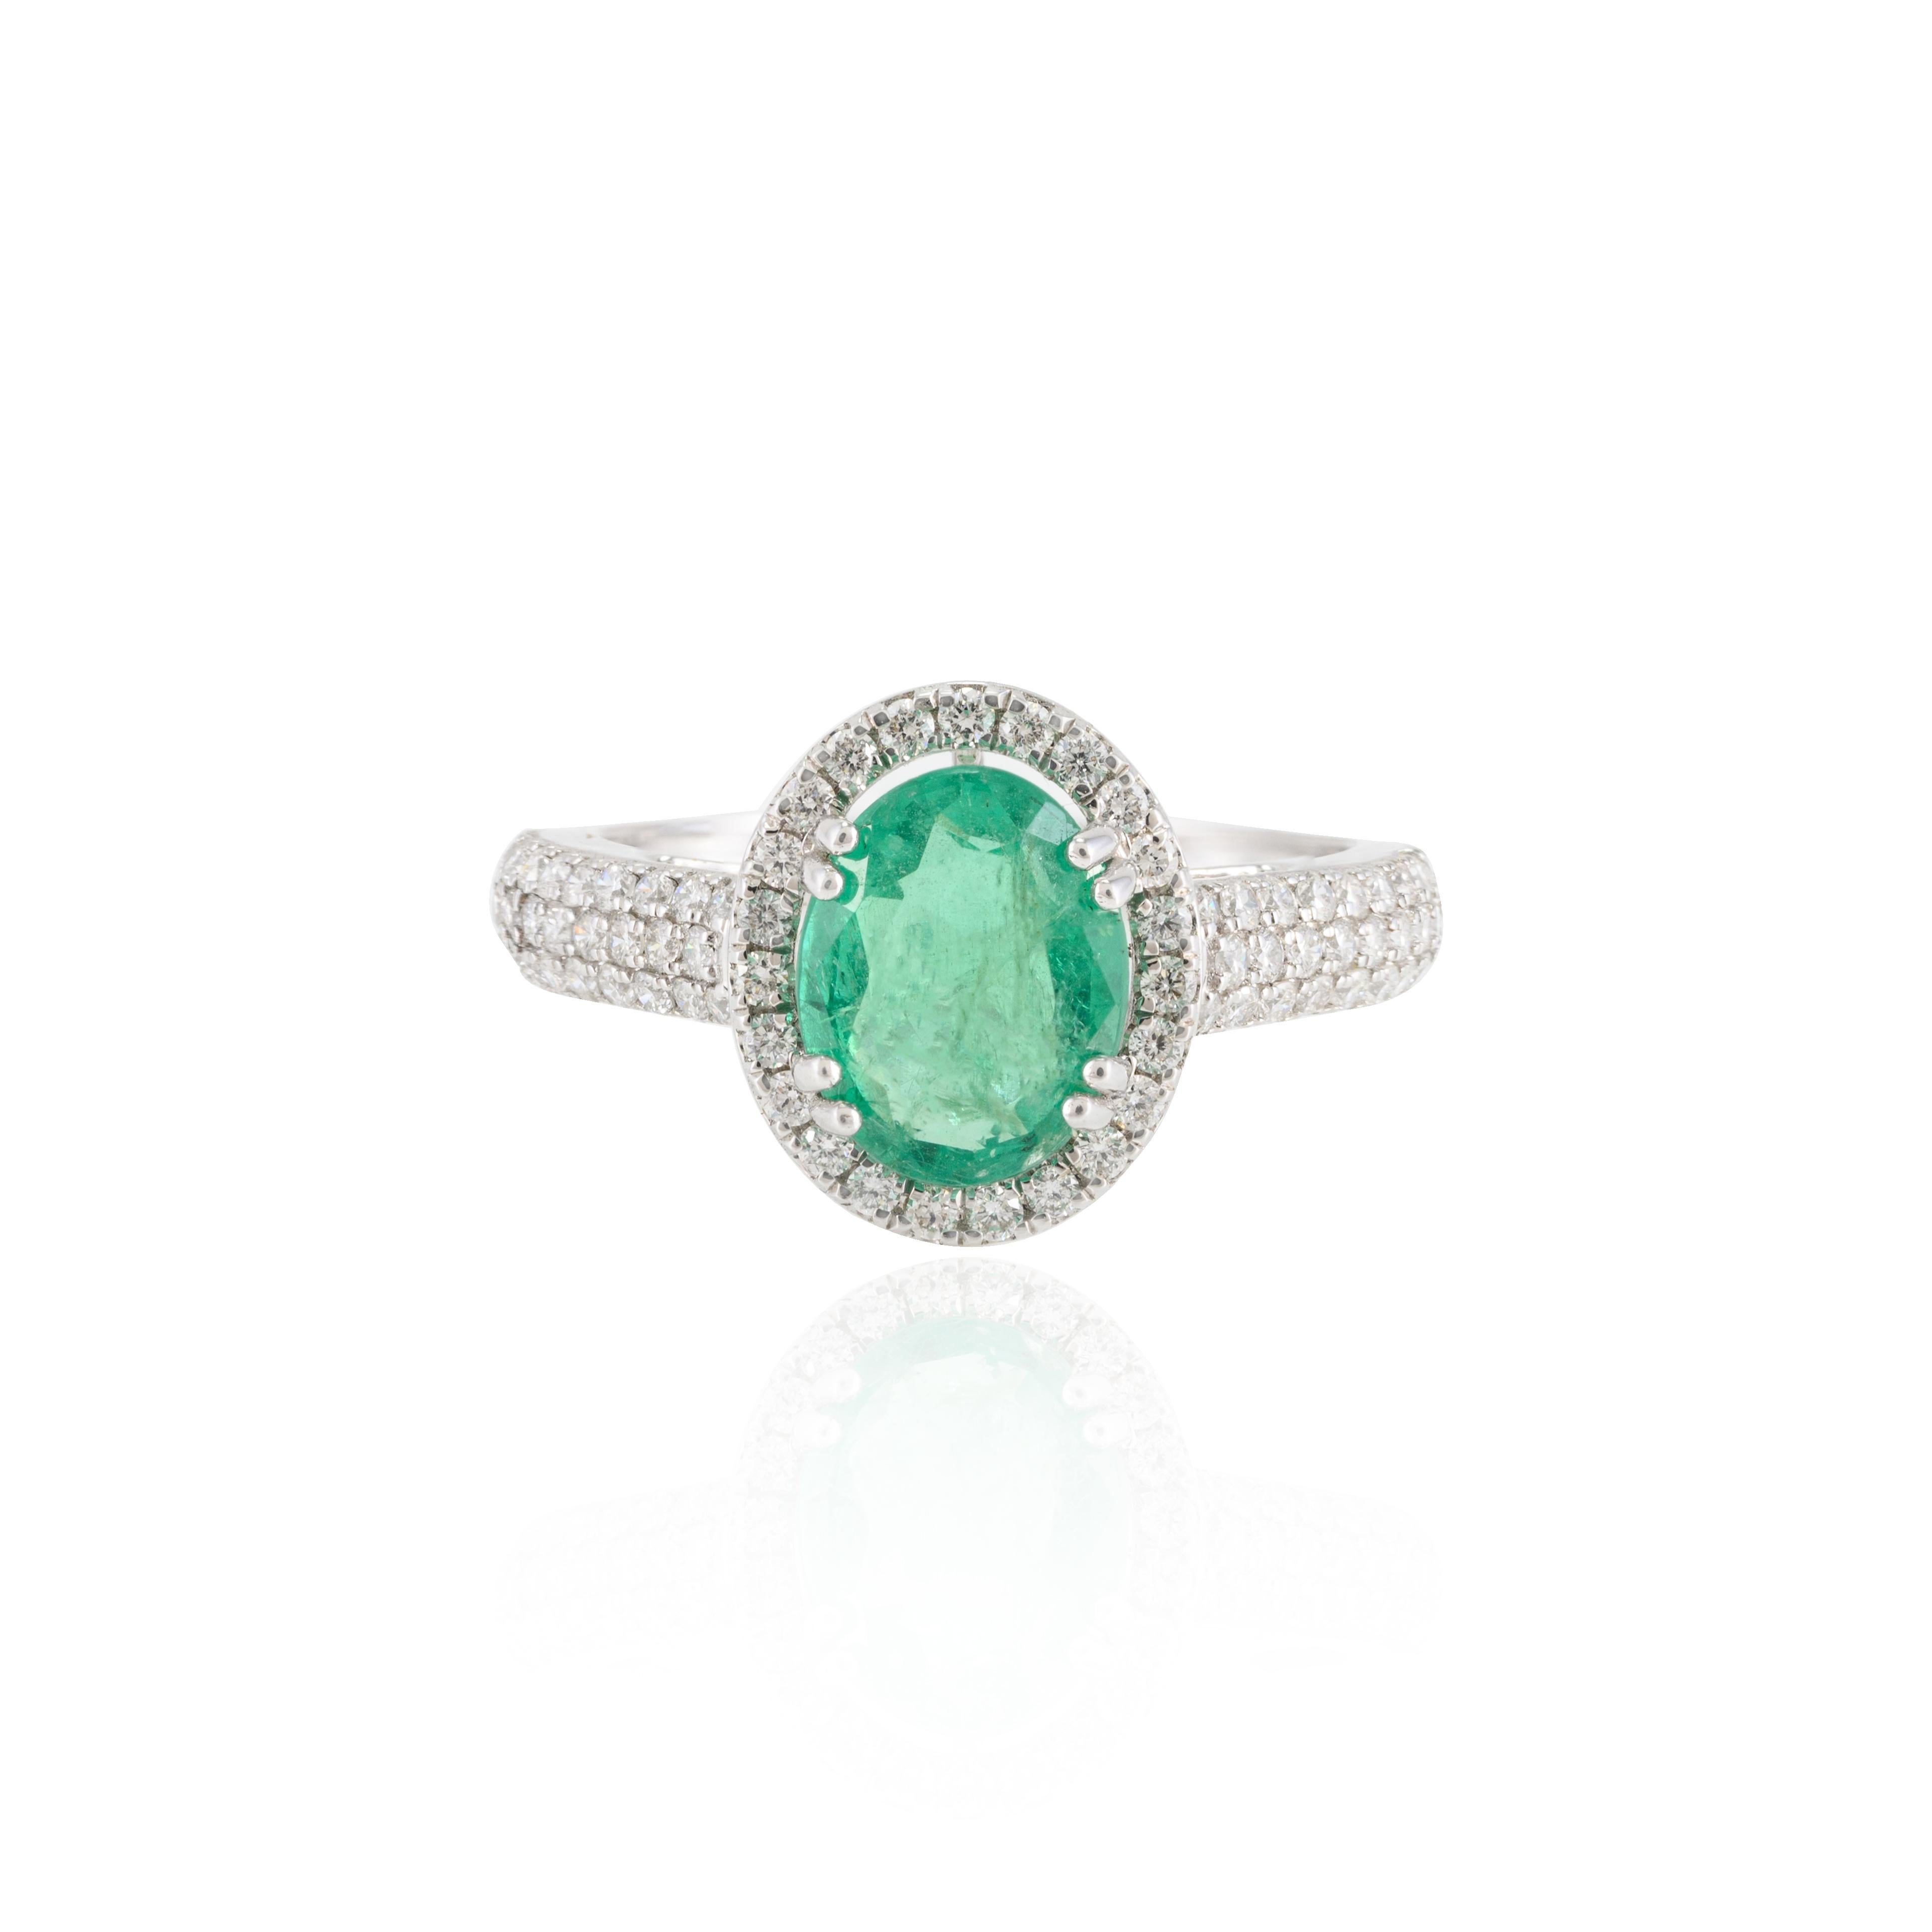 For Sale:  18k Solid White Gold Glamorous Emerald Halo Diamond Engagement Ring for Her 3